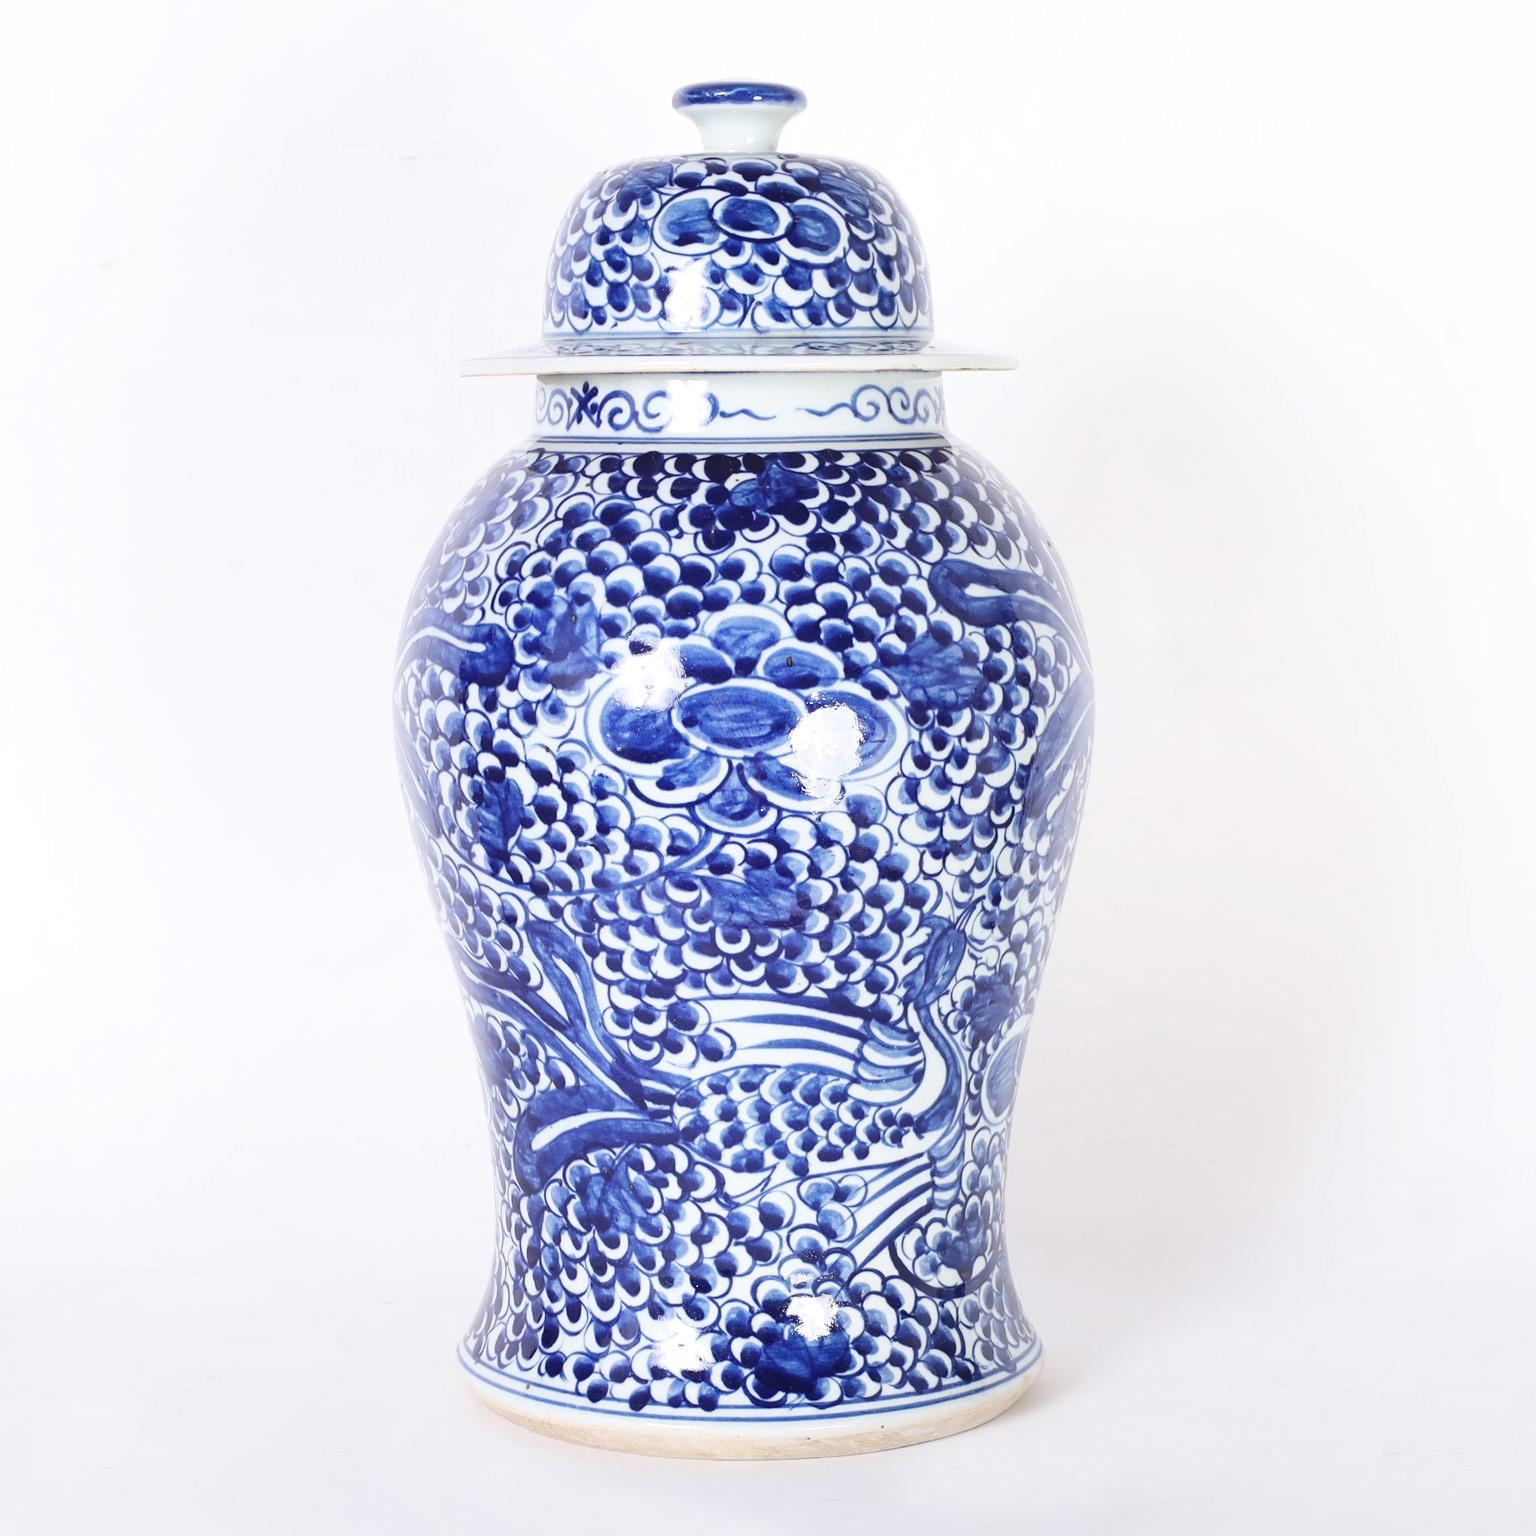 Chinese Export Pair of Blue and White Porcelain Lidded Ginger Jars with Birds & Flowers